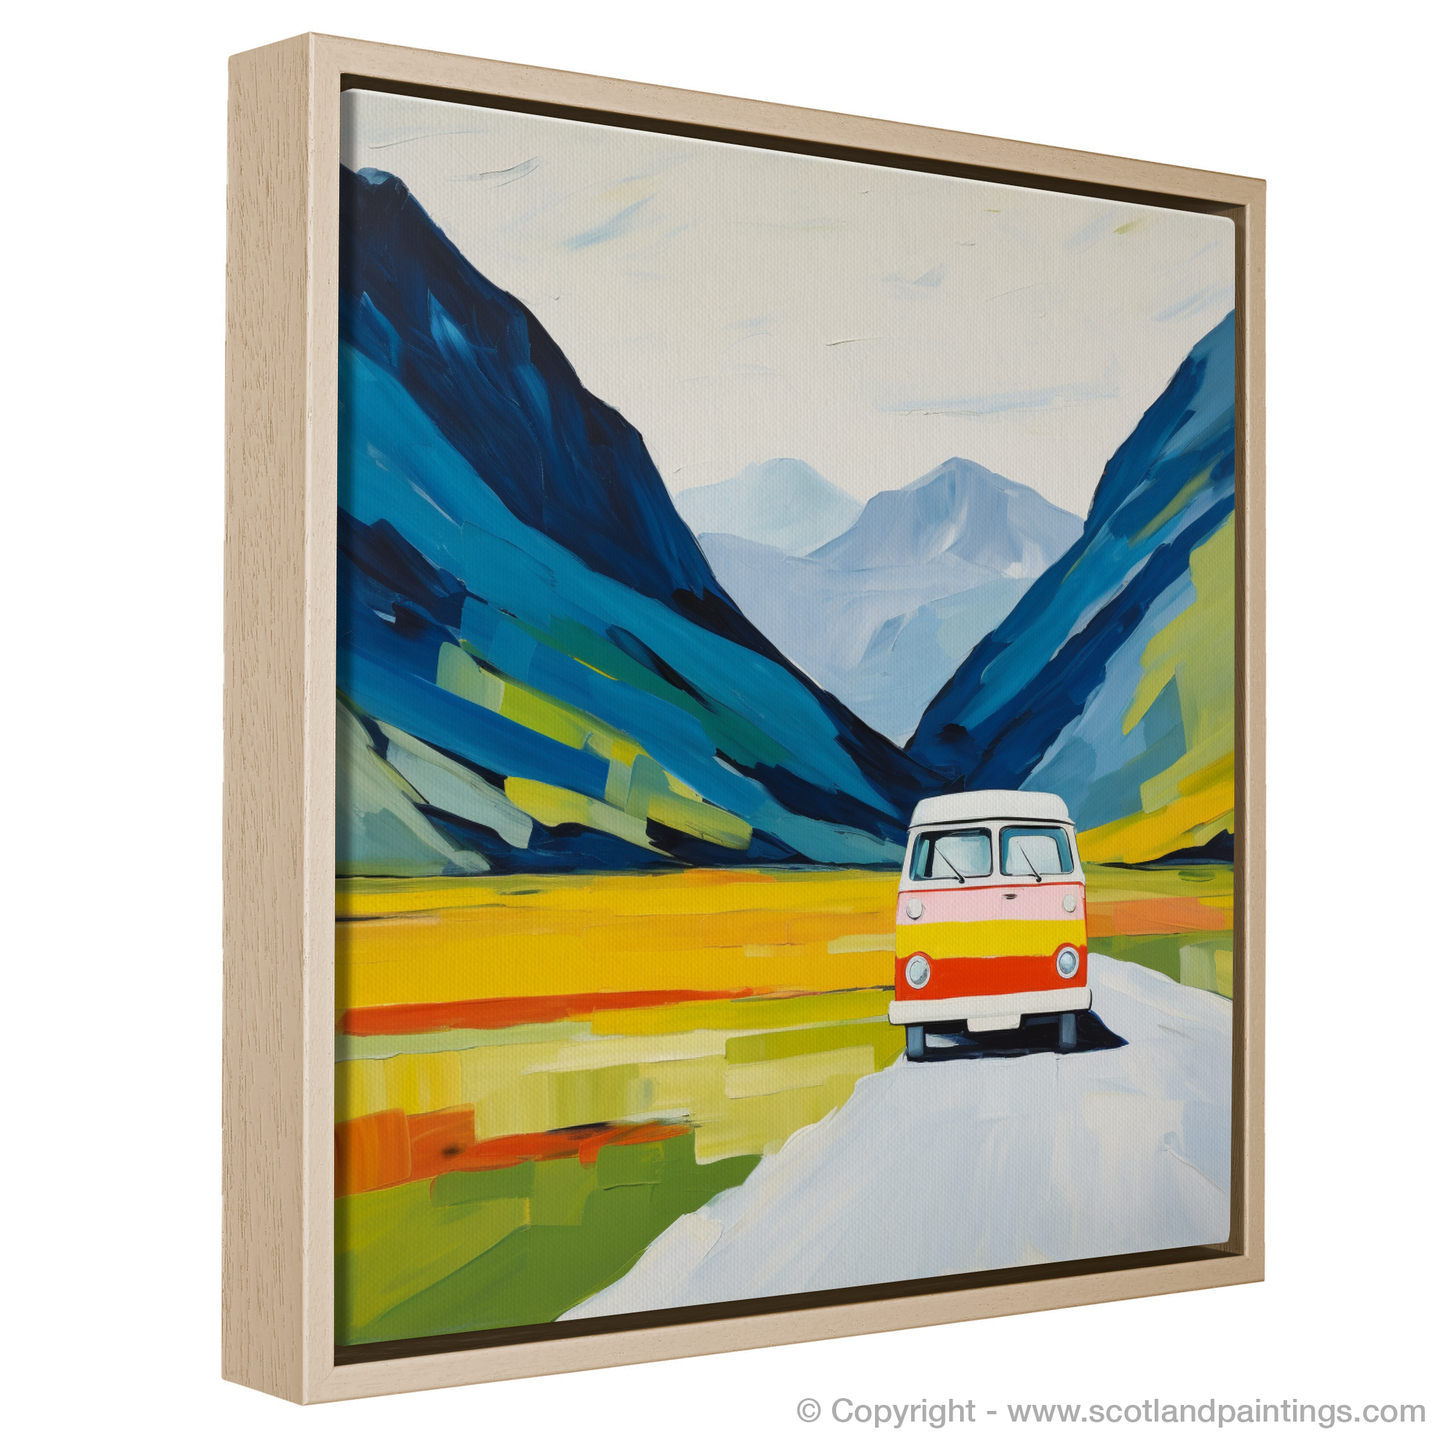 Painting and Art Print of Campervan in Glencoe during summer entitled "Summer Adventure in Glencoe: An Abstract Campervan Escape".